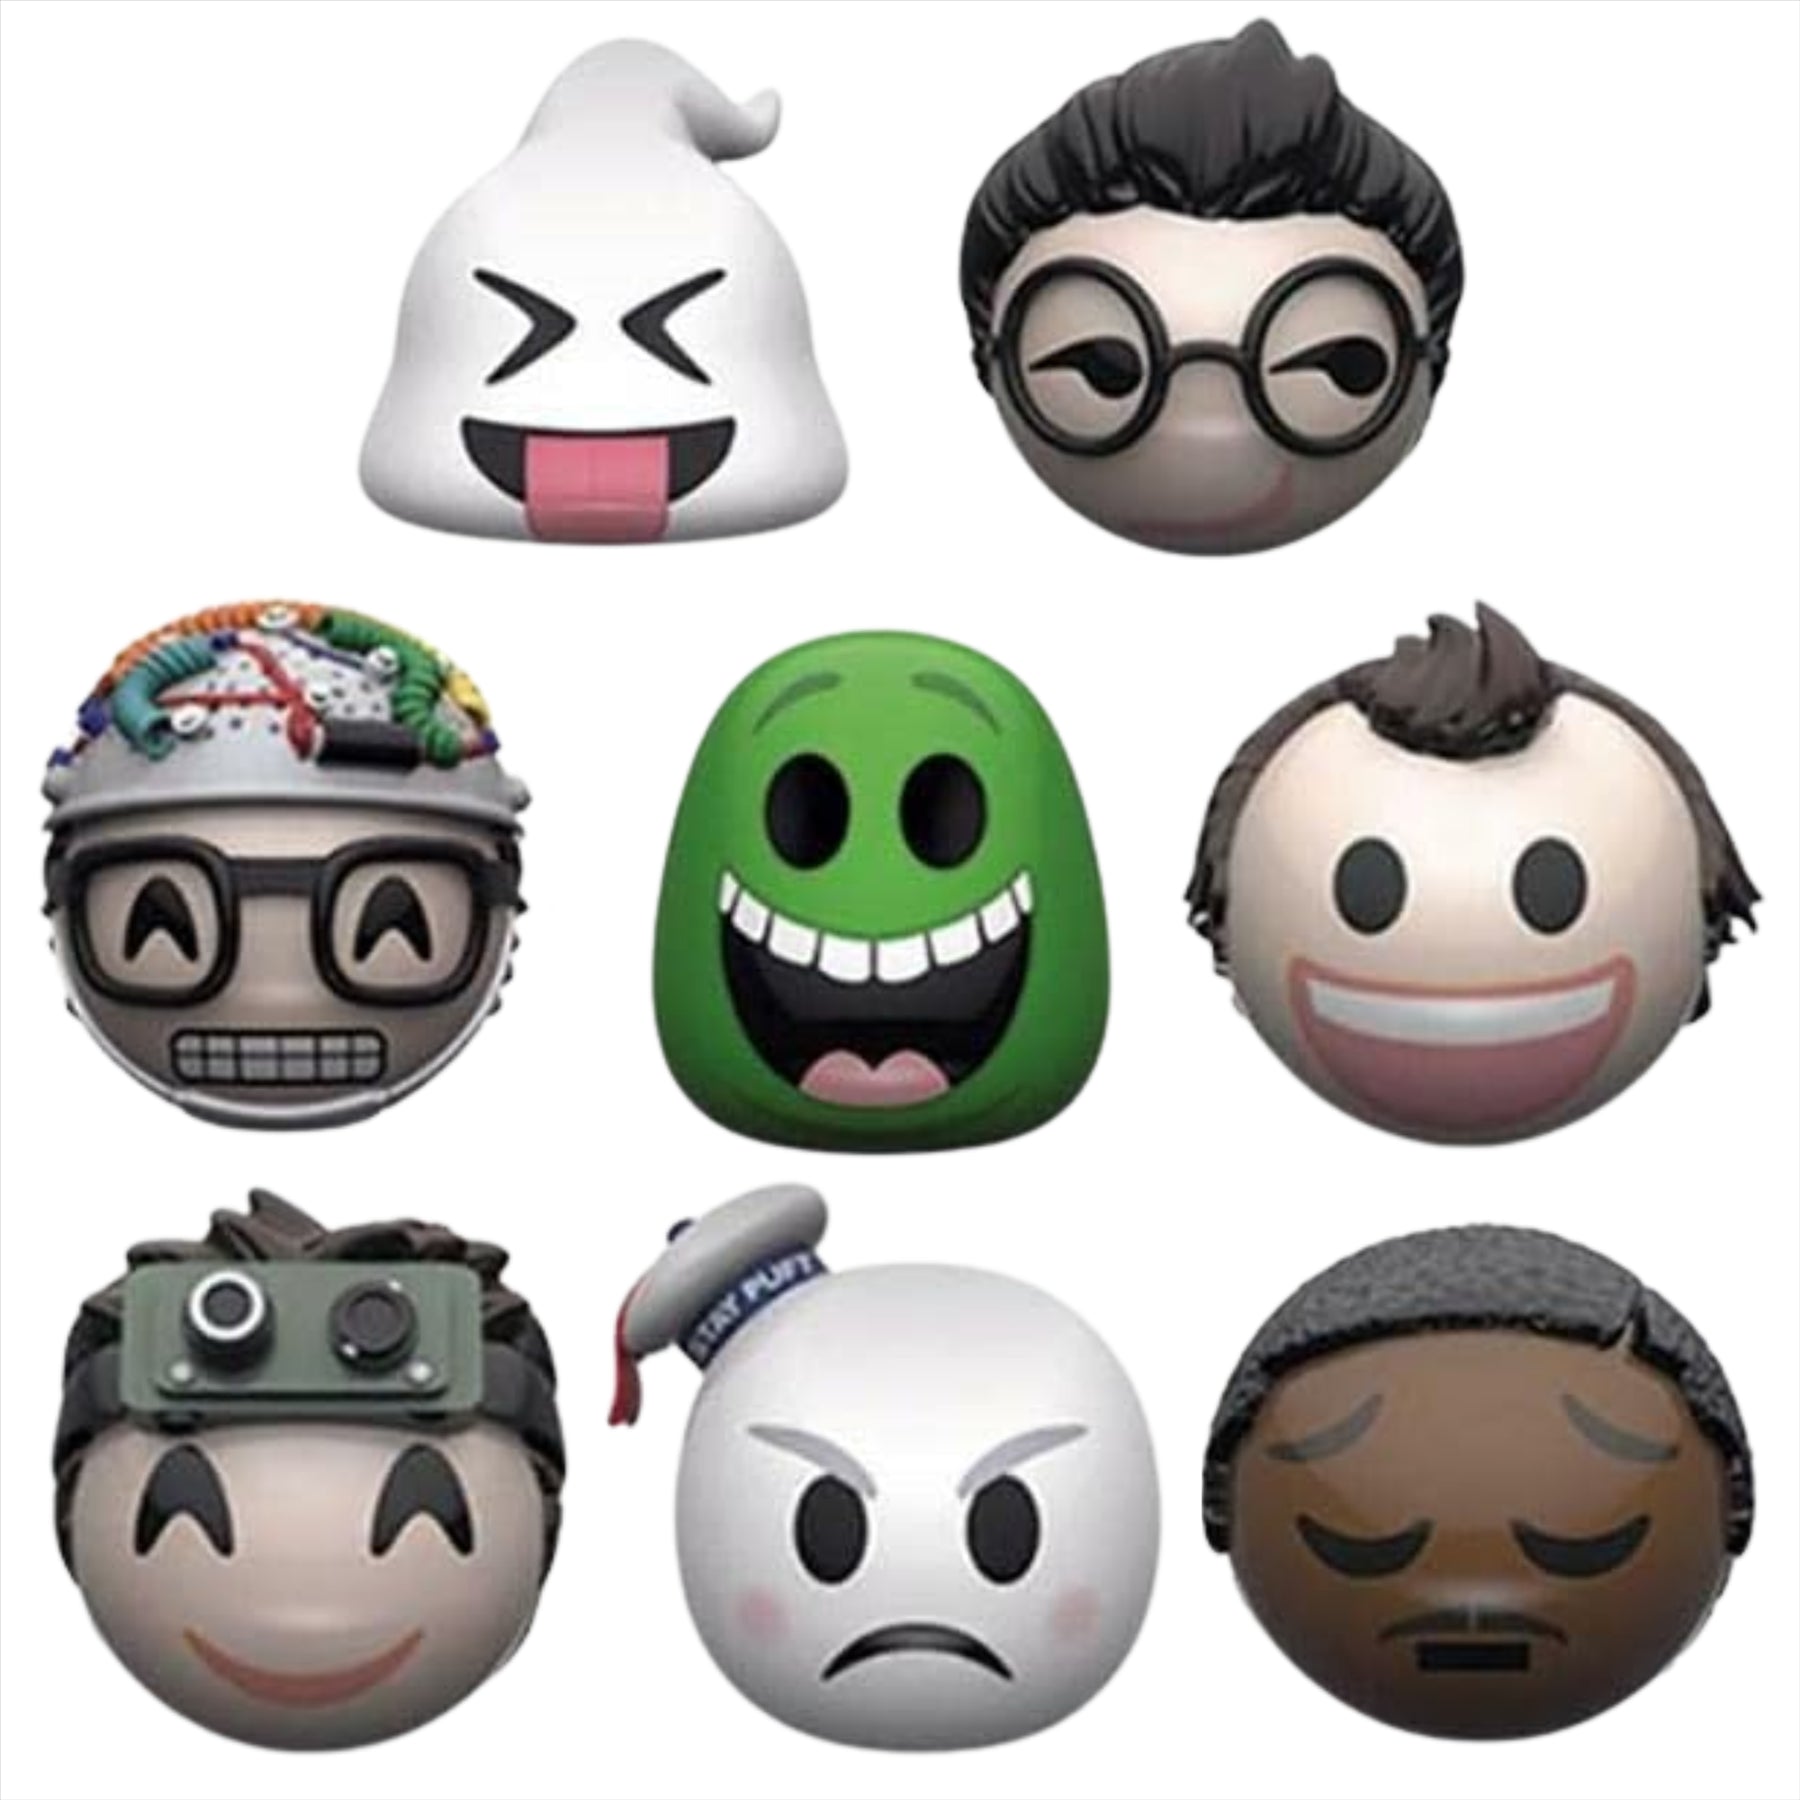 Ghostbusters - FunkoMyMoji Identified 4cm Collectible & Highly Detailed Figure Heads - Set 2 8-Pack - Toptoys2u